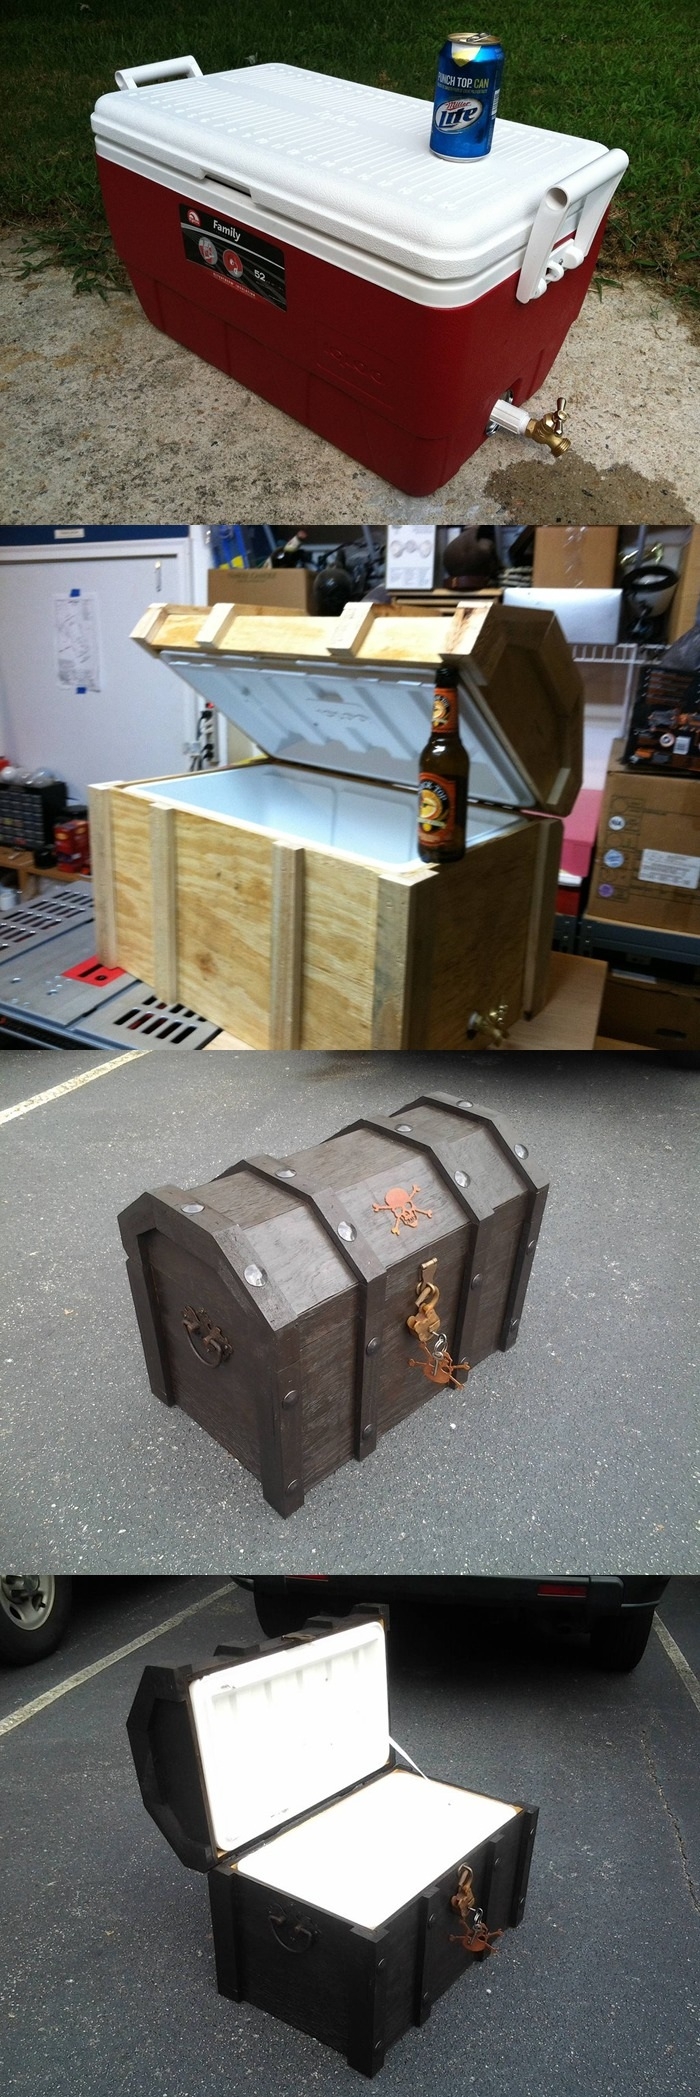 DIY Pirate Chest Cooler